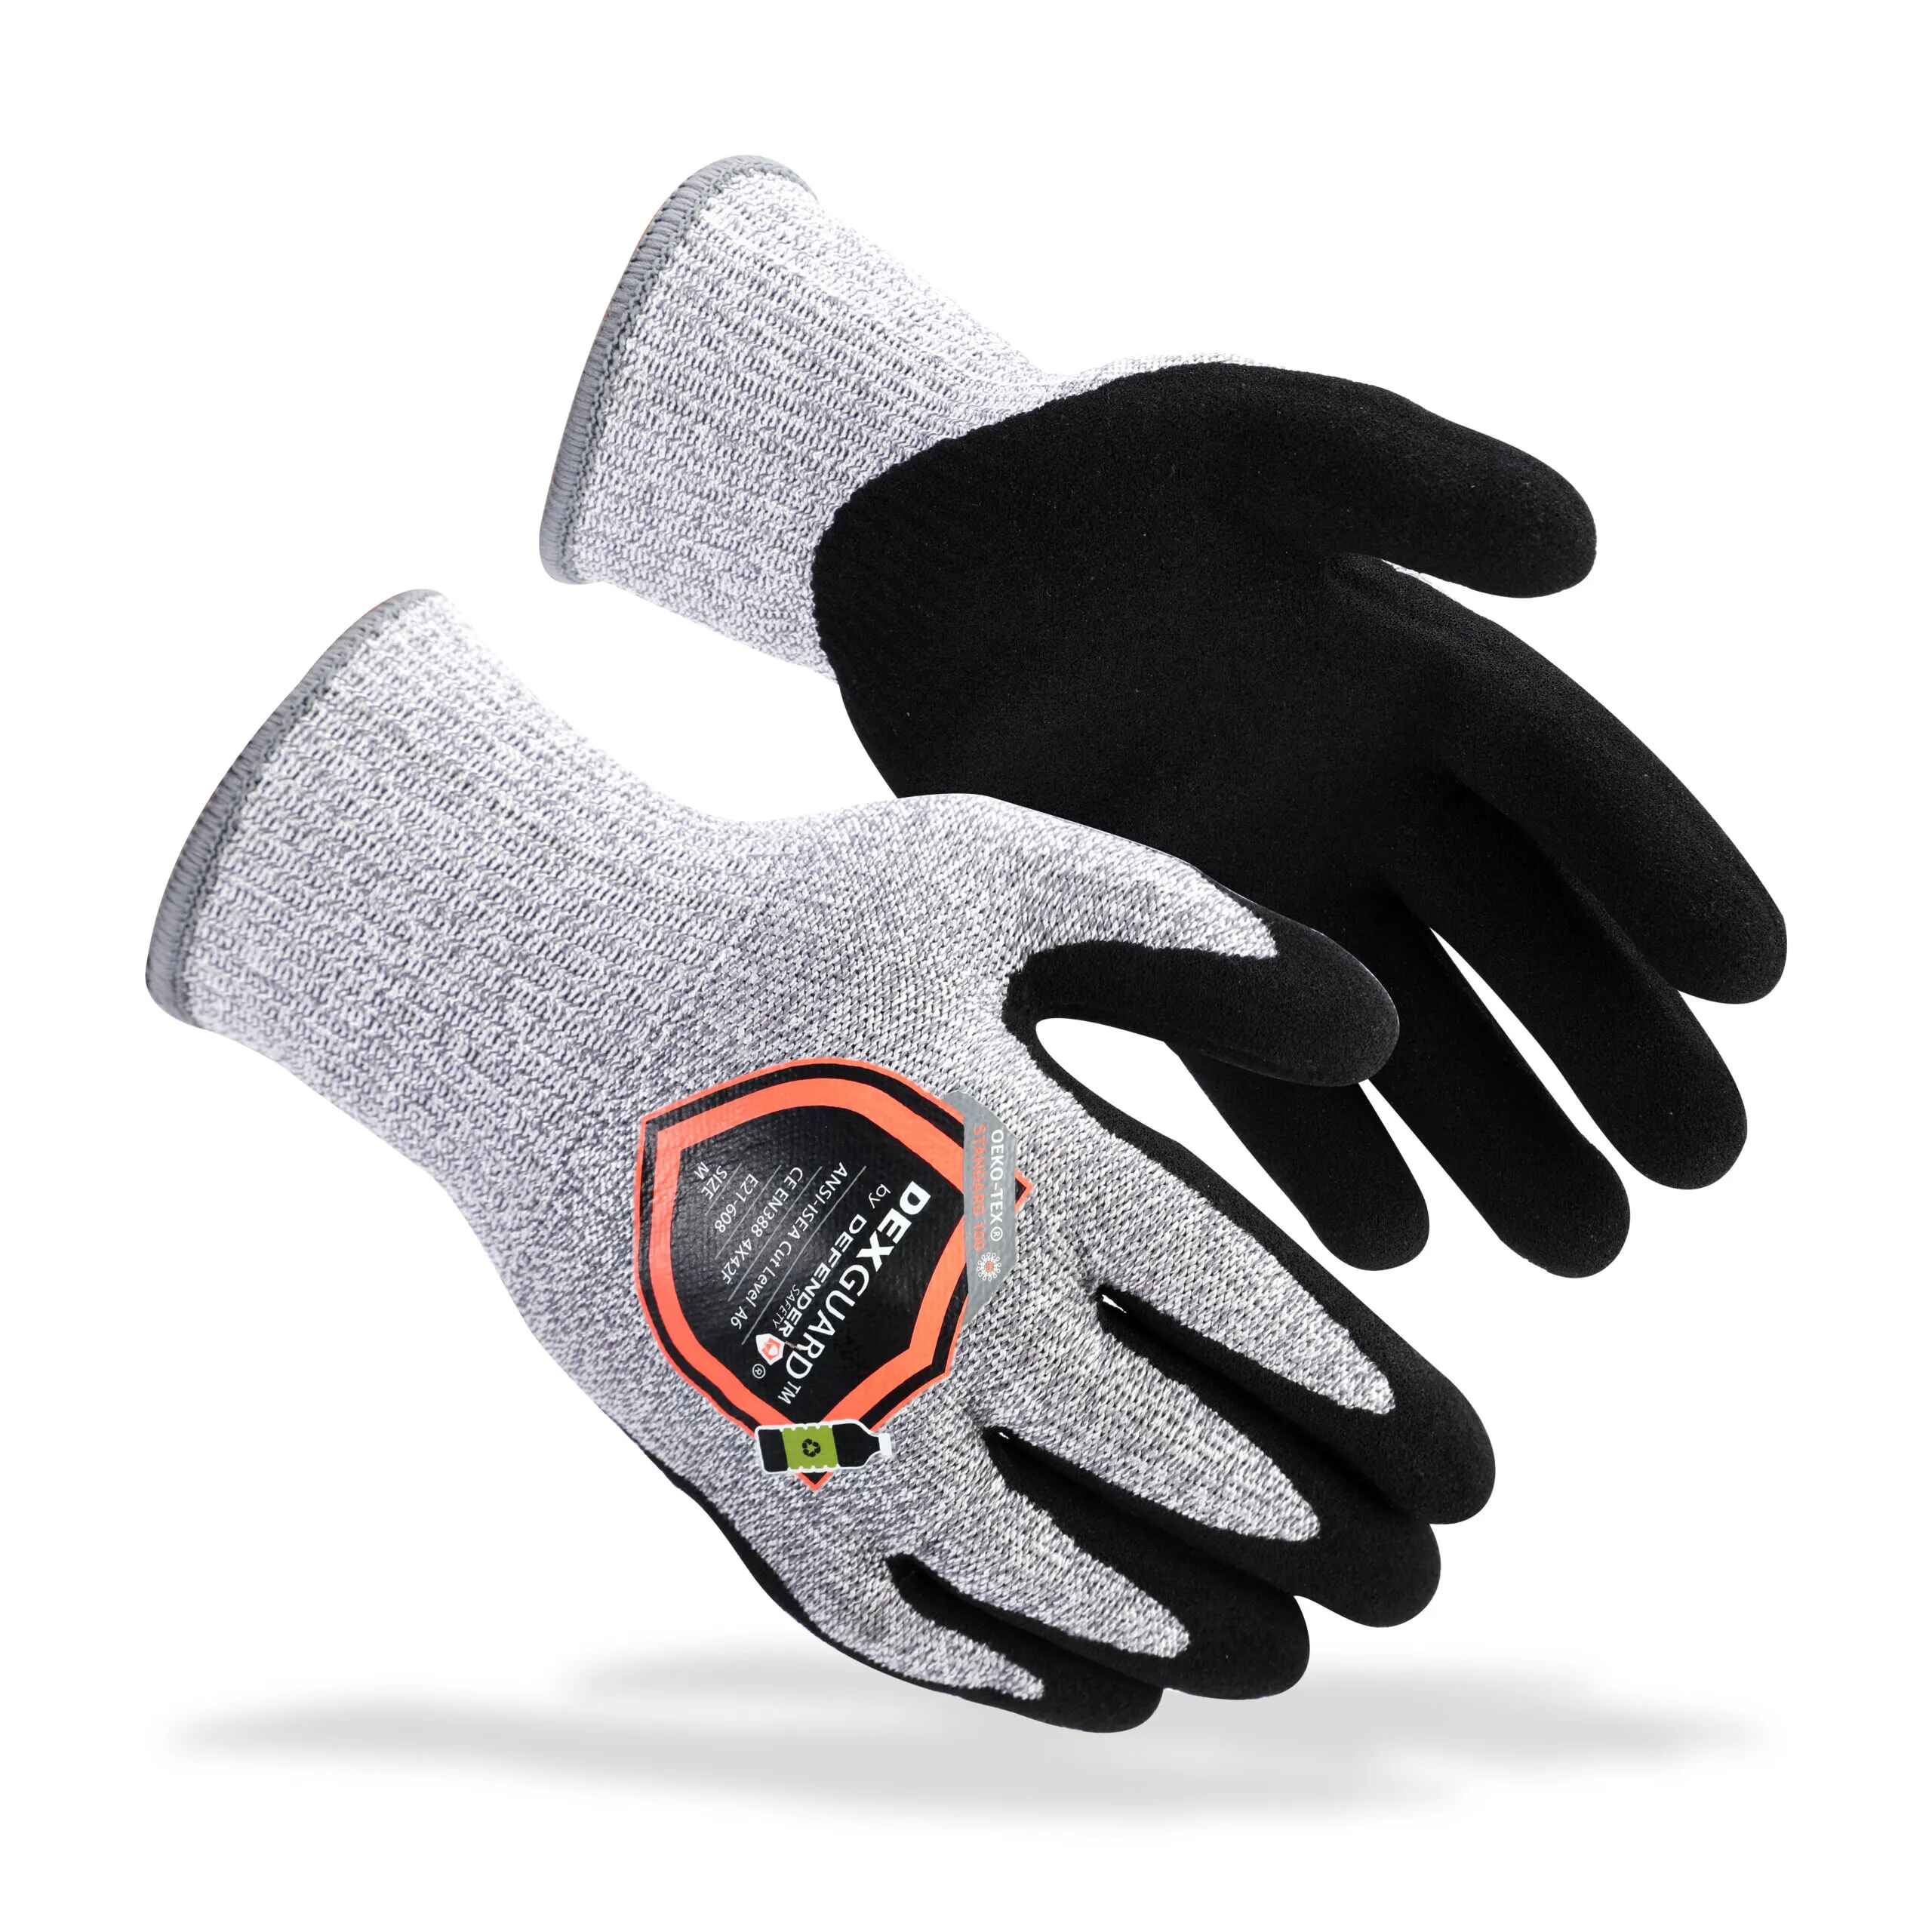 Heavy Duty Mechanic Work Gloves with Grip, Cut Resistant Rubber